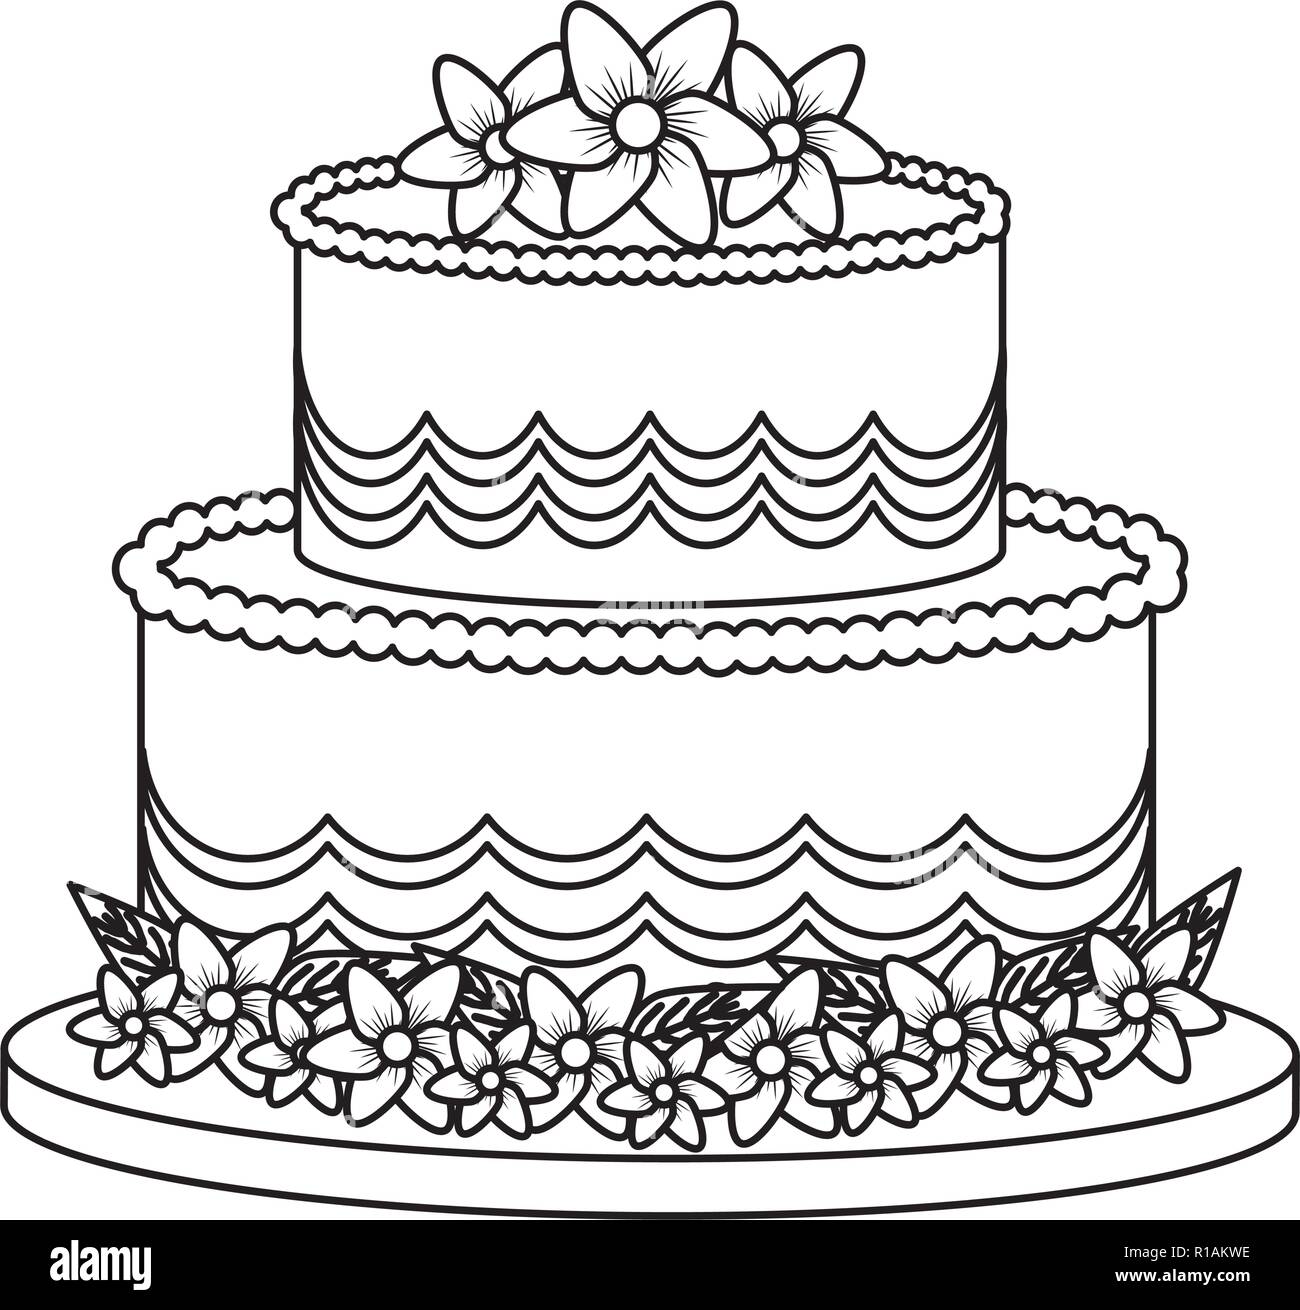 Big cake with flowers in black and white vector illustration ...